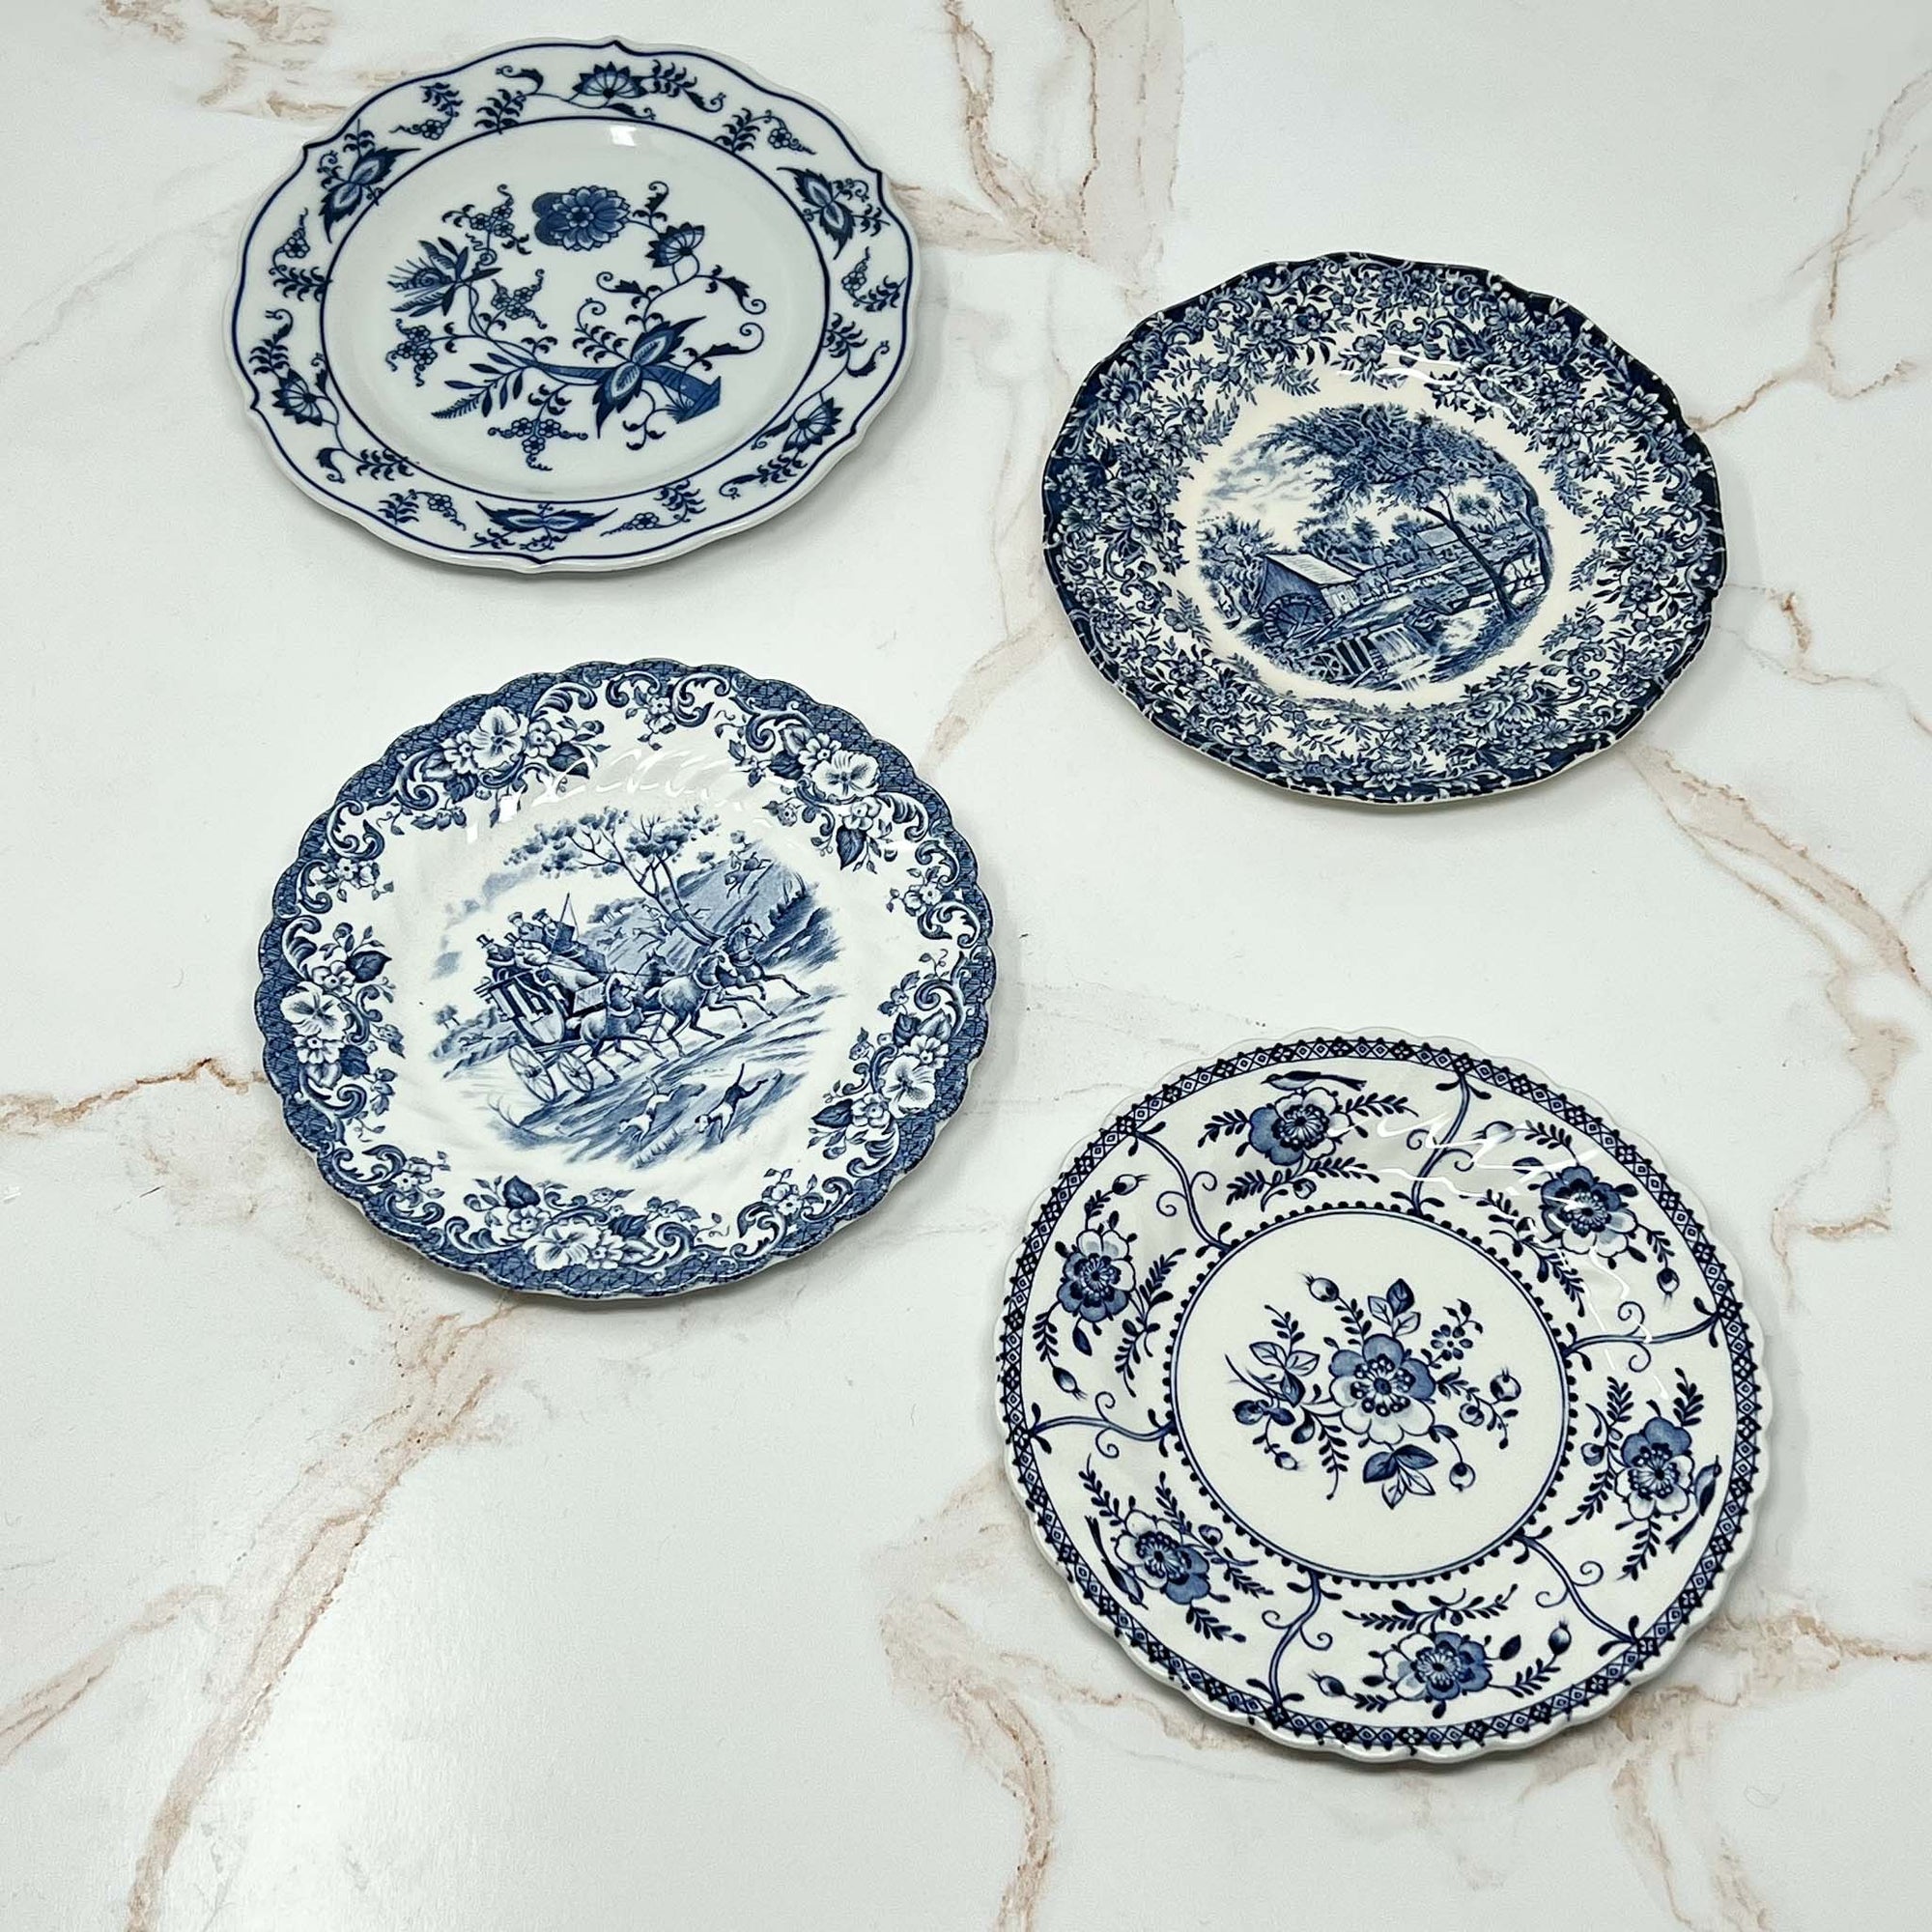 Gracious Bread &amp; Butter Plate Set | 1 Indies, 1 Coaching Scenes,  1 Mill Stream, and 1 Blue Danube  pattern - 4 blue and white bread &amp; butter plates in set